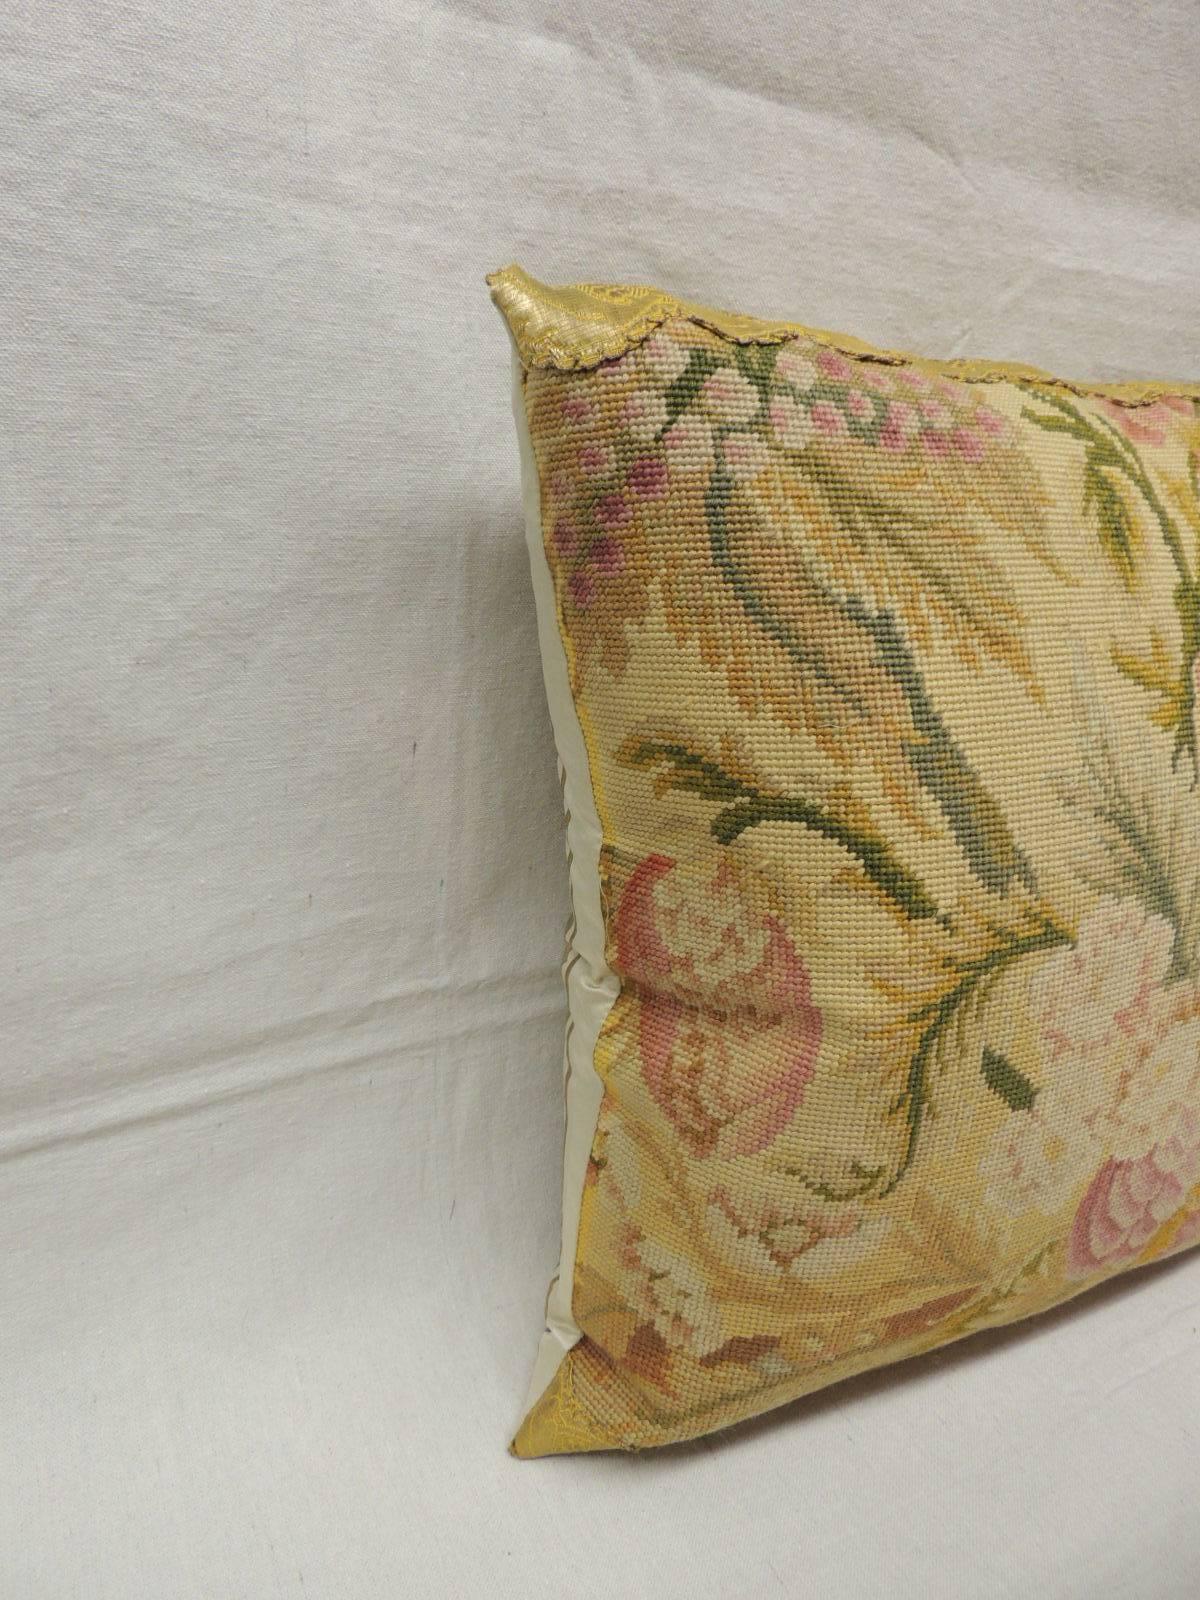 Pair of 19th century tapestry pillows. 
Pair of floral tapestry pillows depicting a bouquet of flowers in bloom embellished with a 19th century metallic gold floral trim and a striped yellow silk backing. Textile panel is in shades of pink, fuchsia,